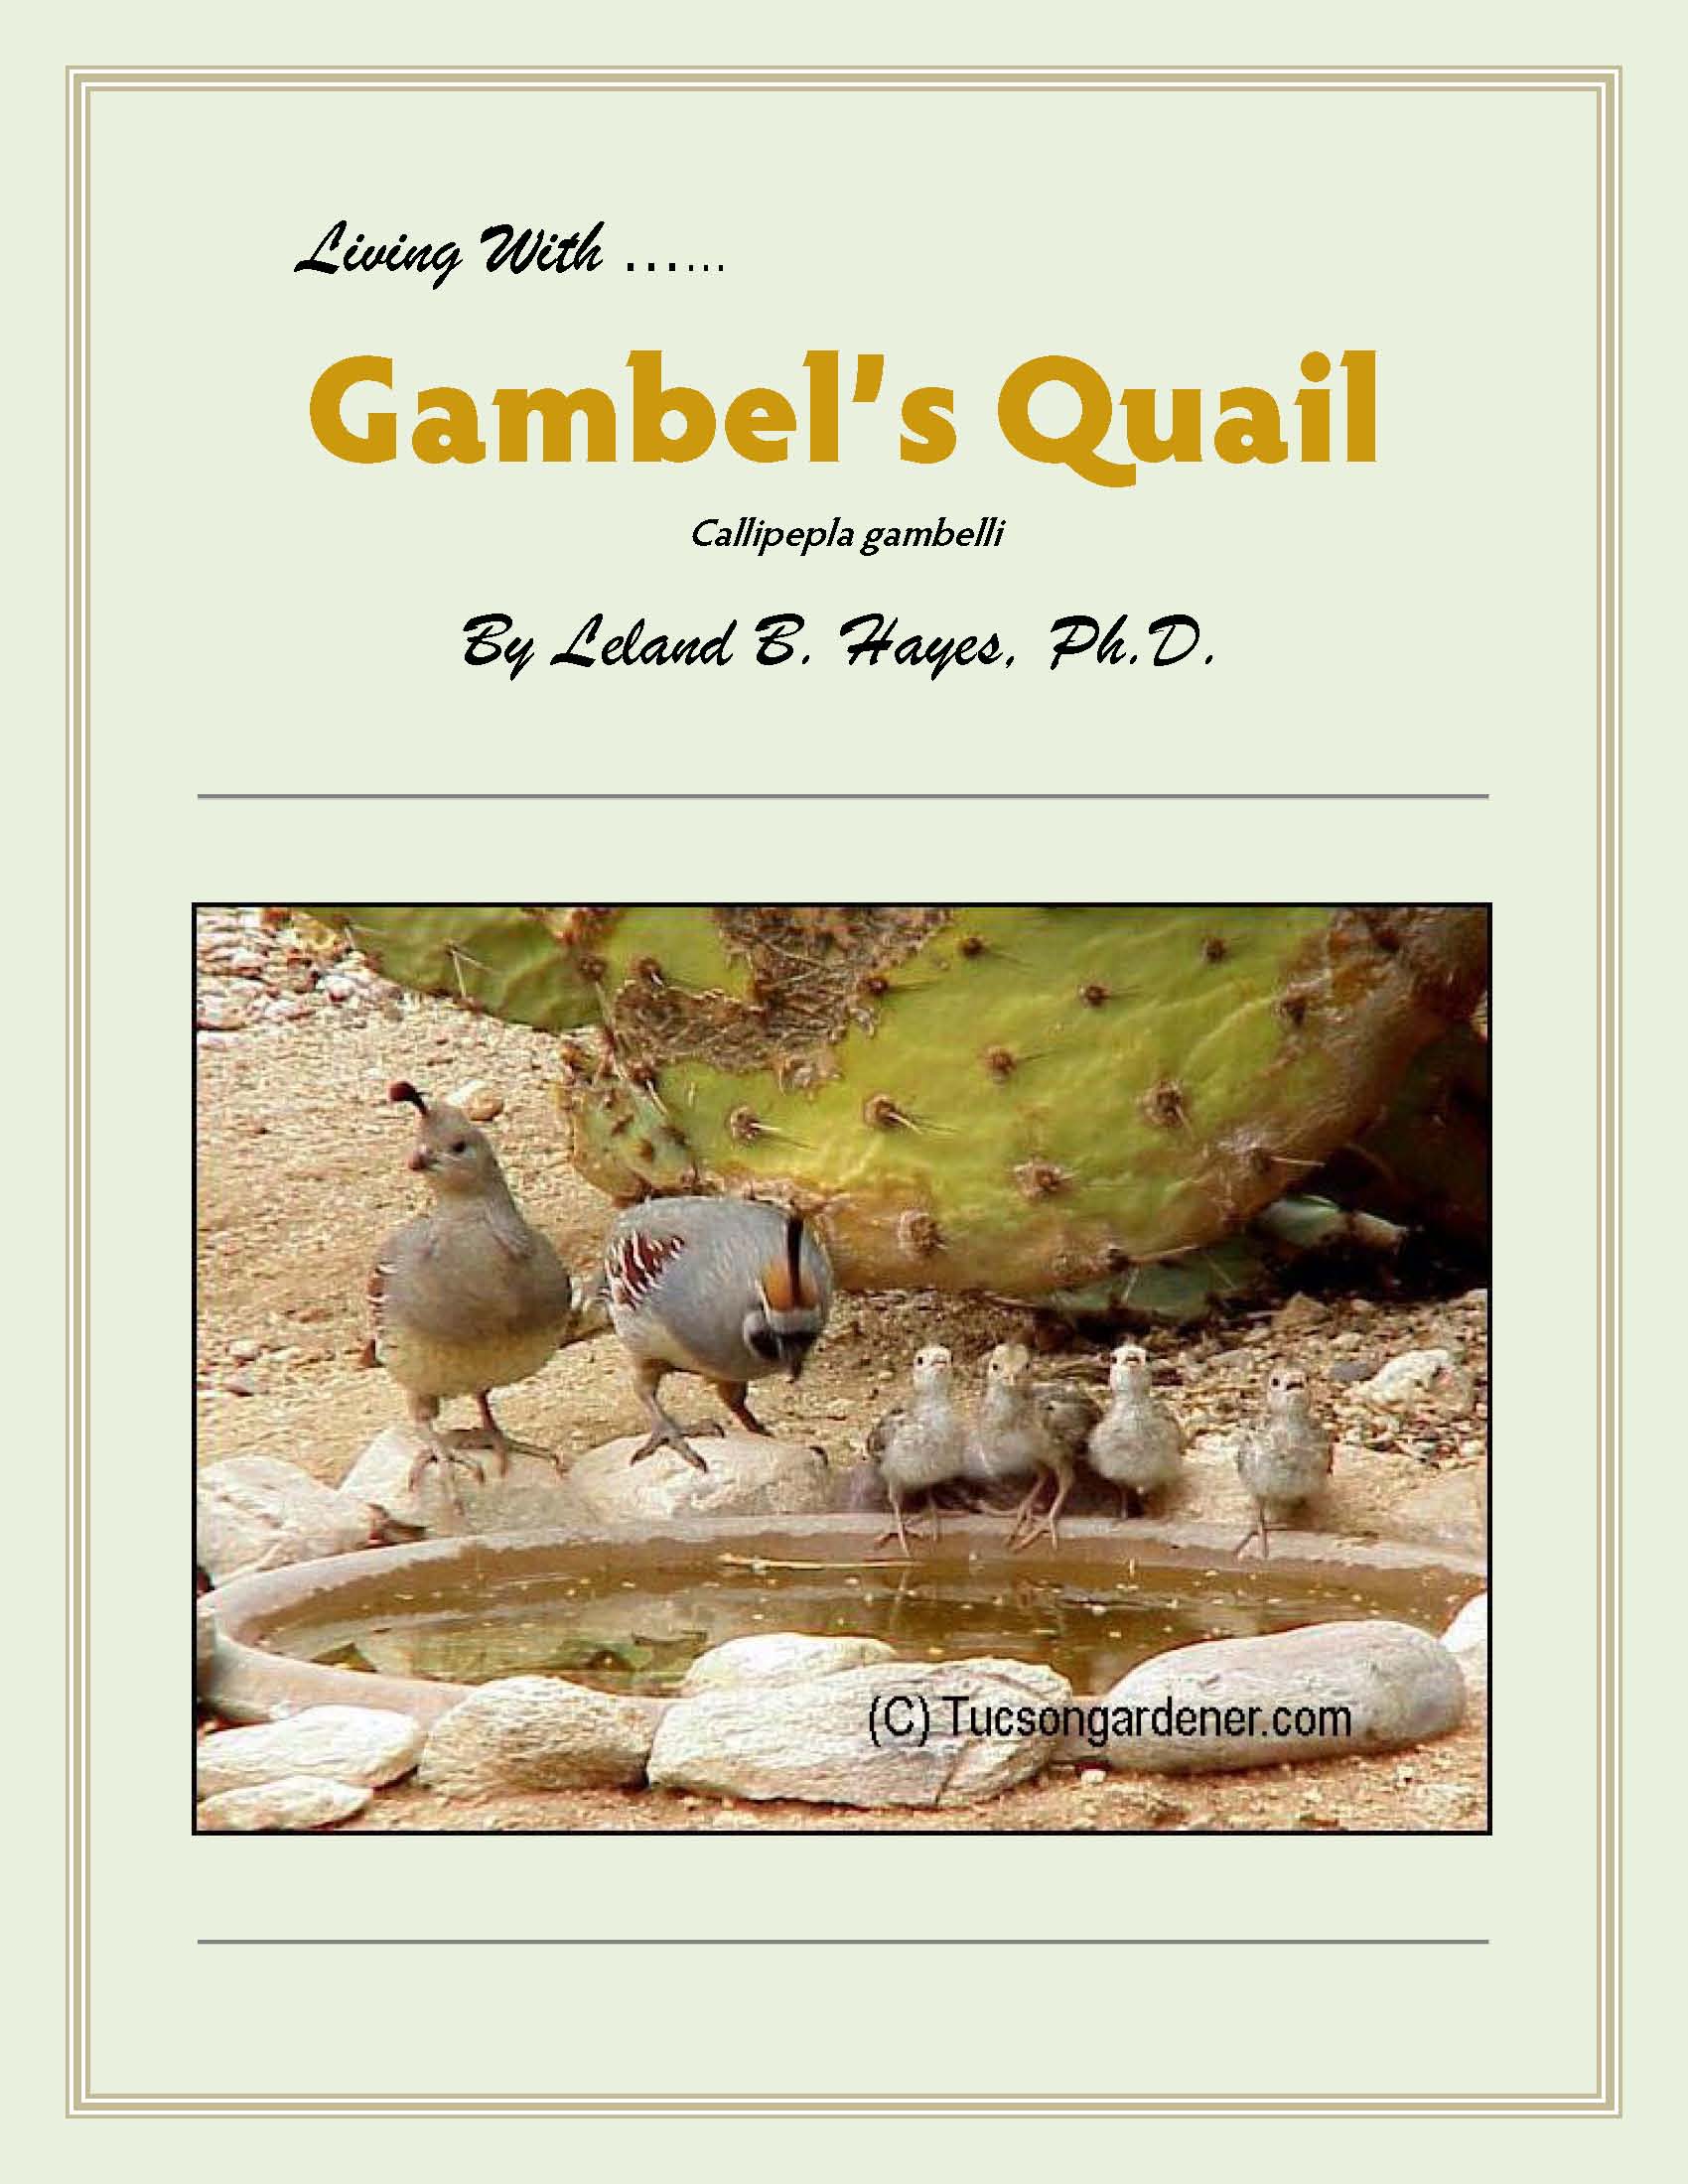 Living With Gambel's Quail, a CD by Leland Hayes